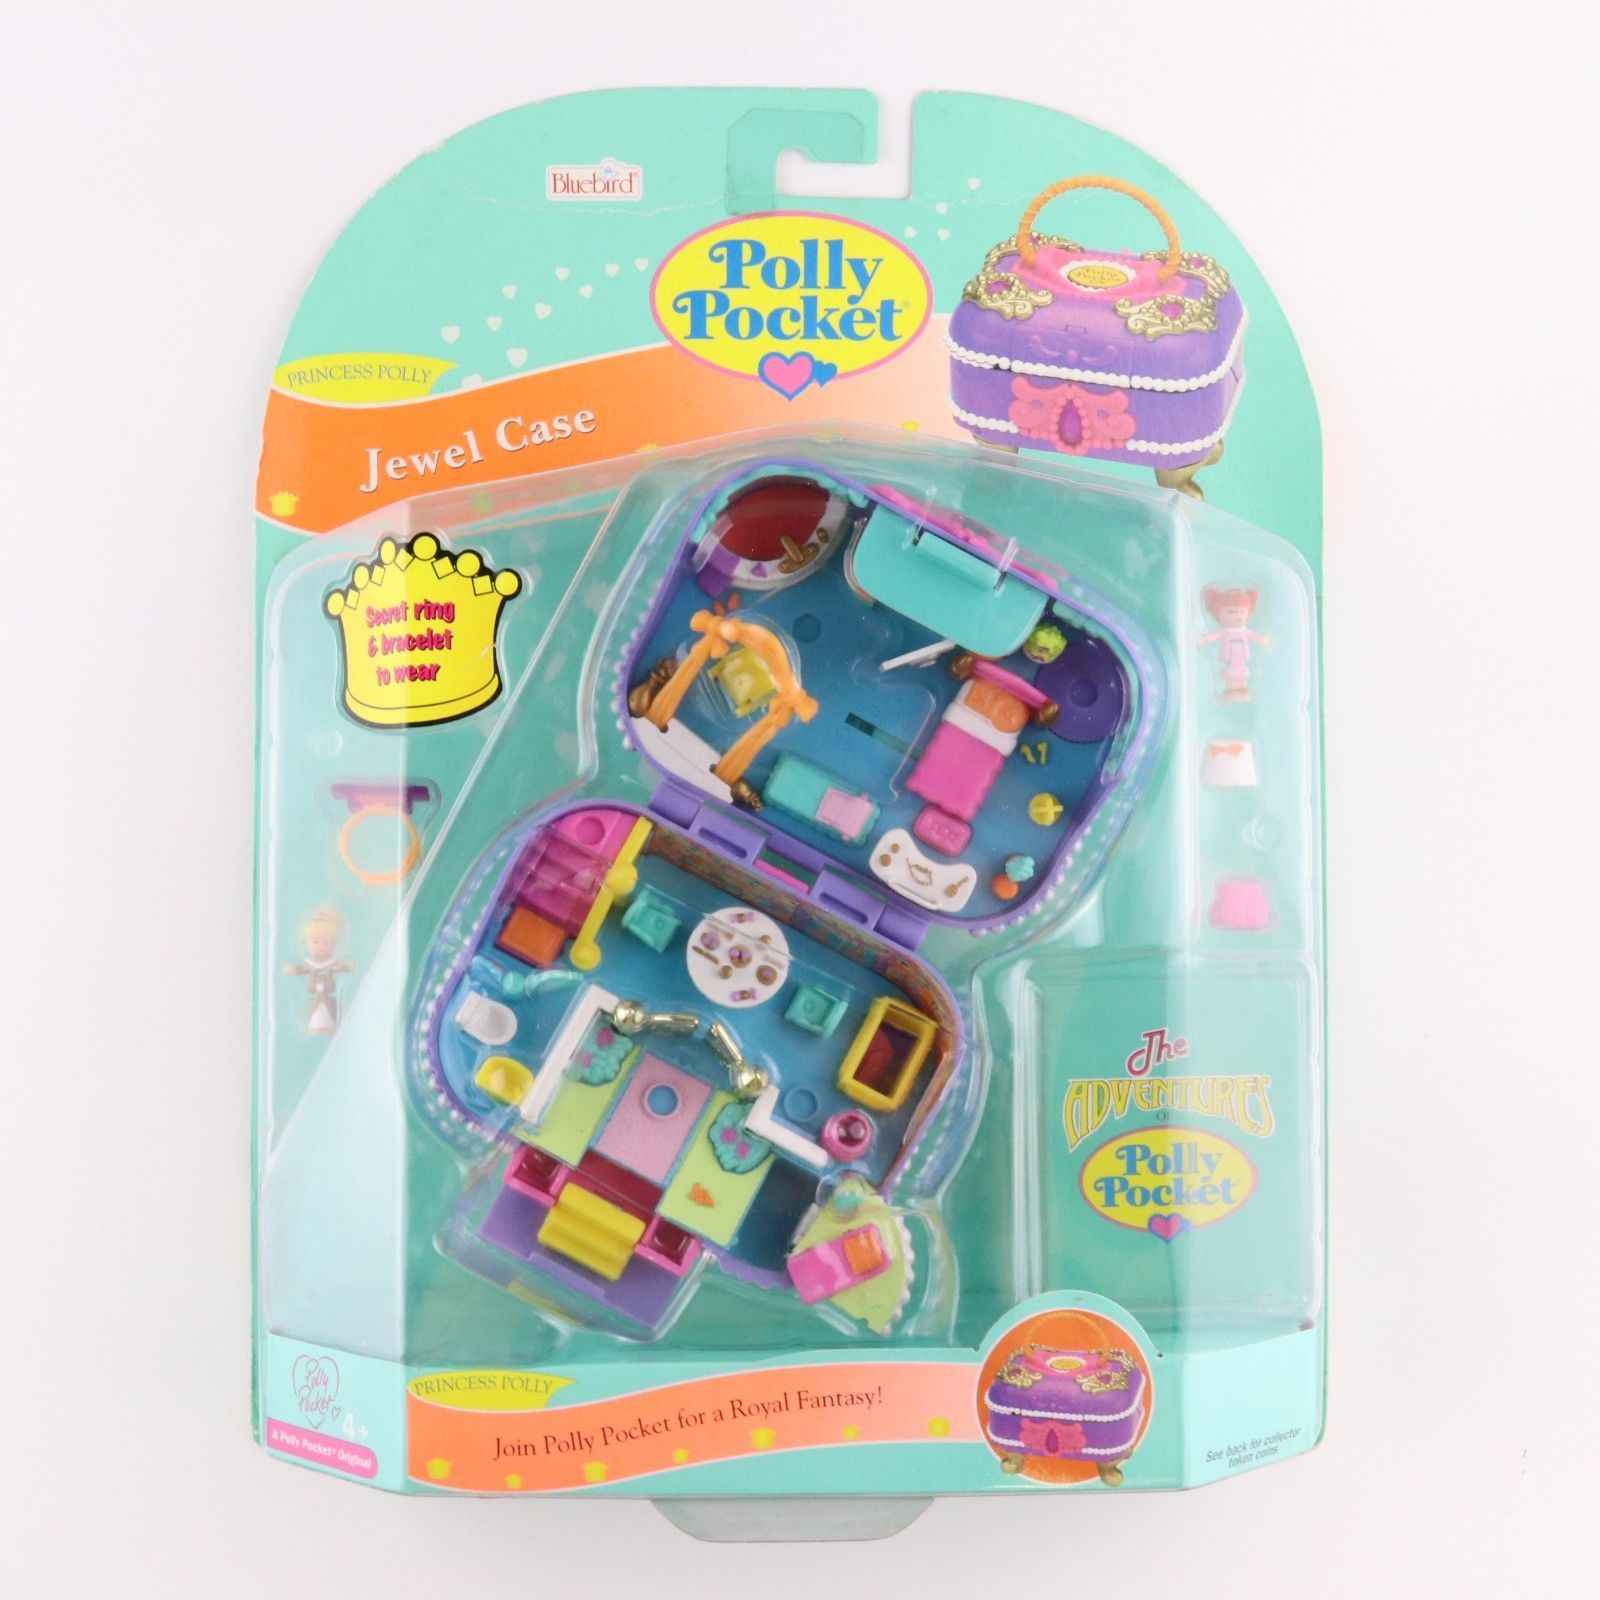 Check The Attic Your Old Polly Pocket Toys Are Now Worth A Fortune